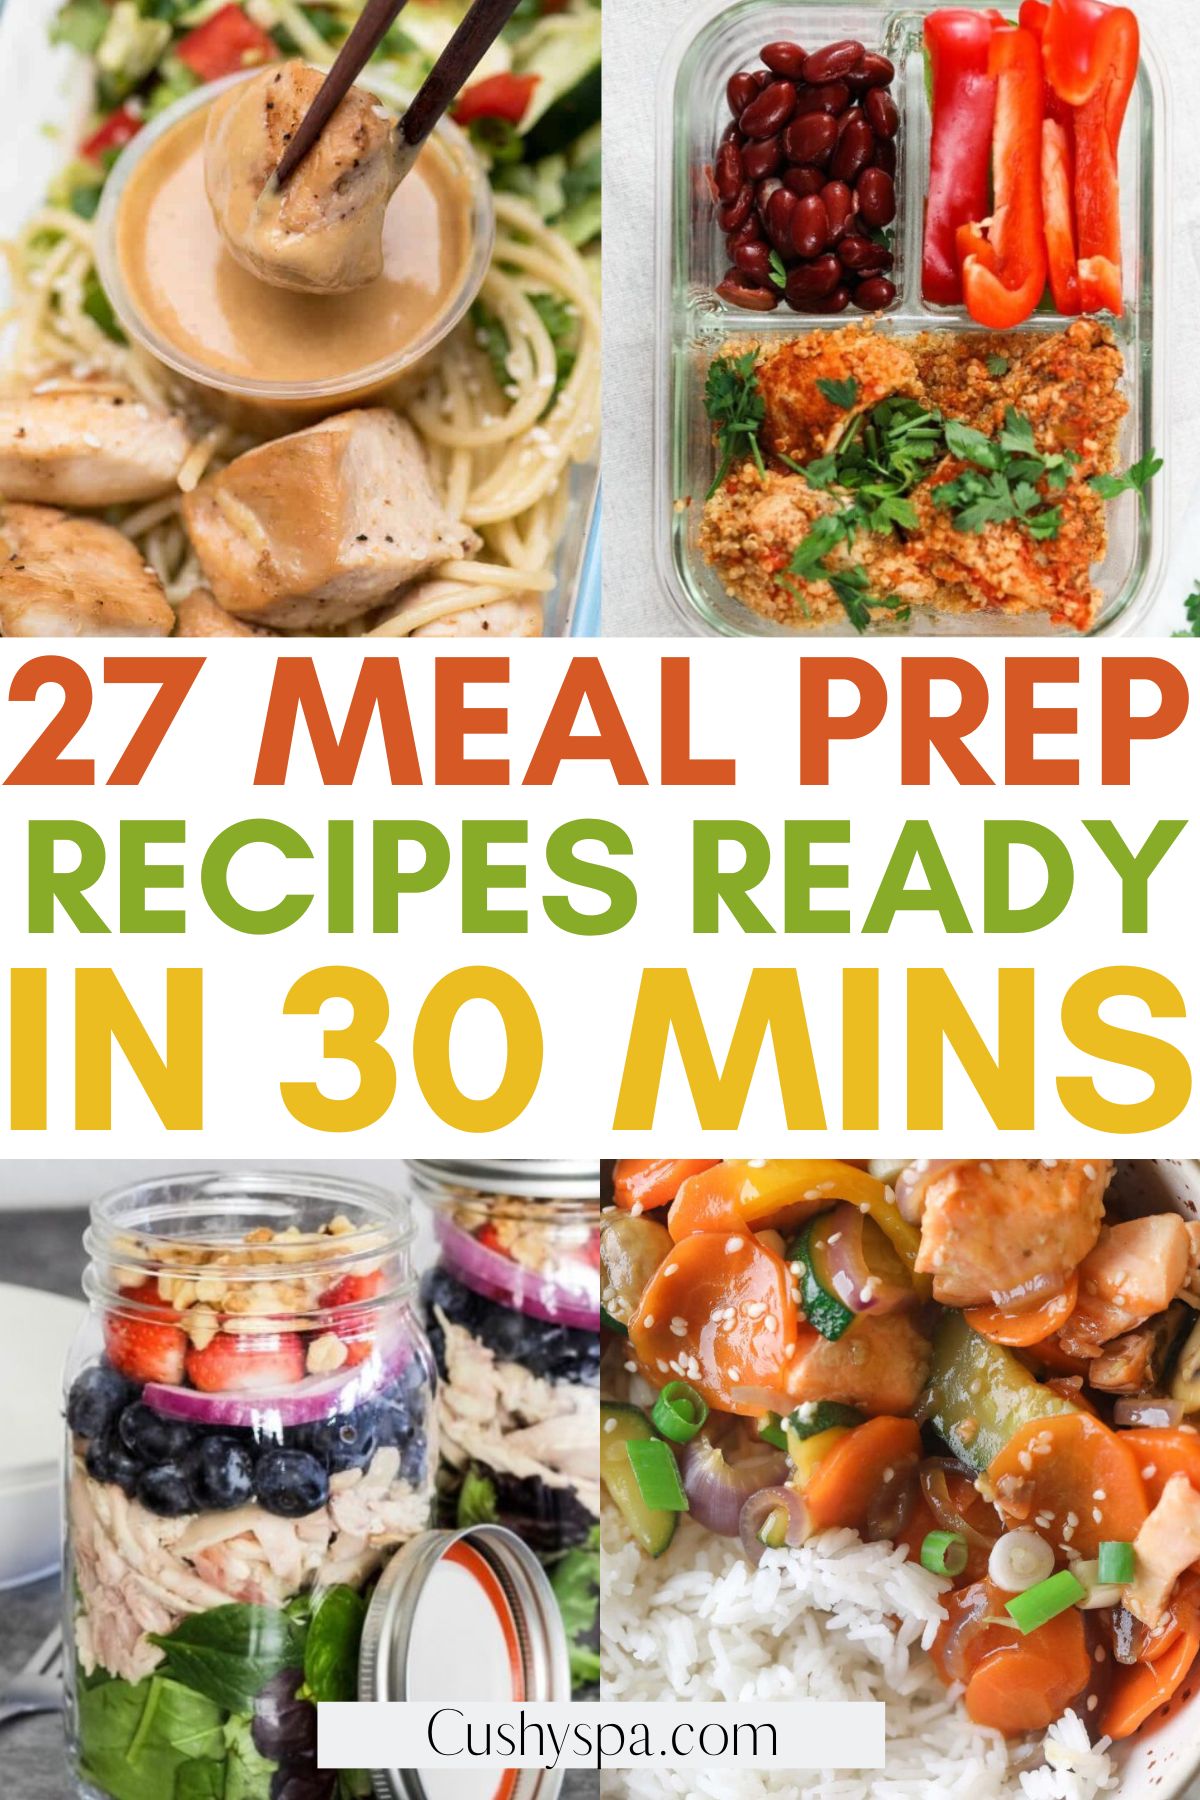 Meal Prep Recipes ready in 30 minutes